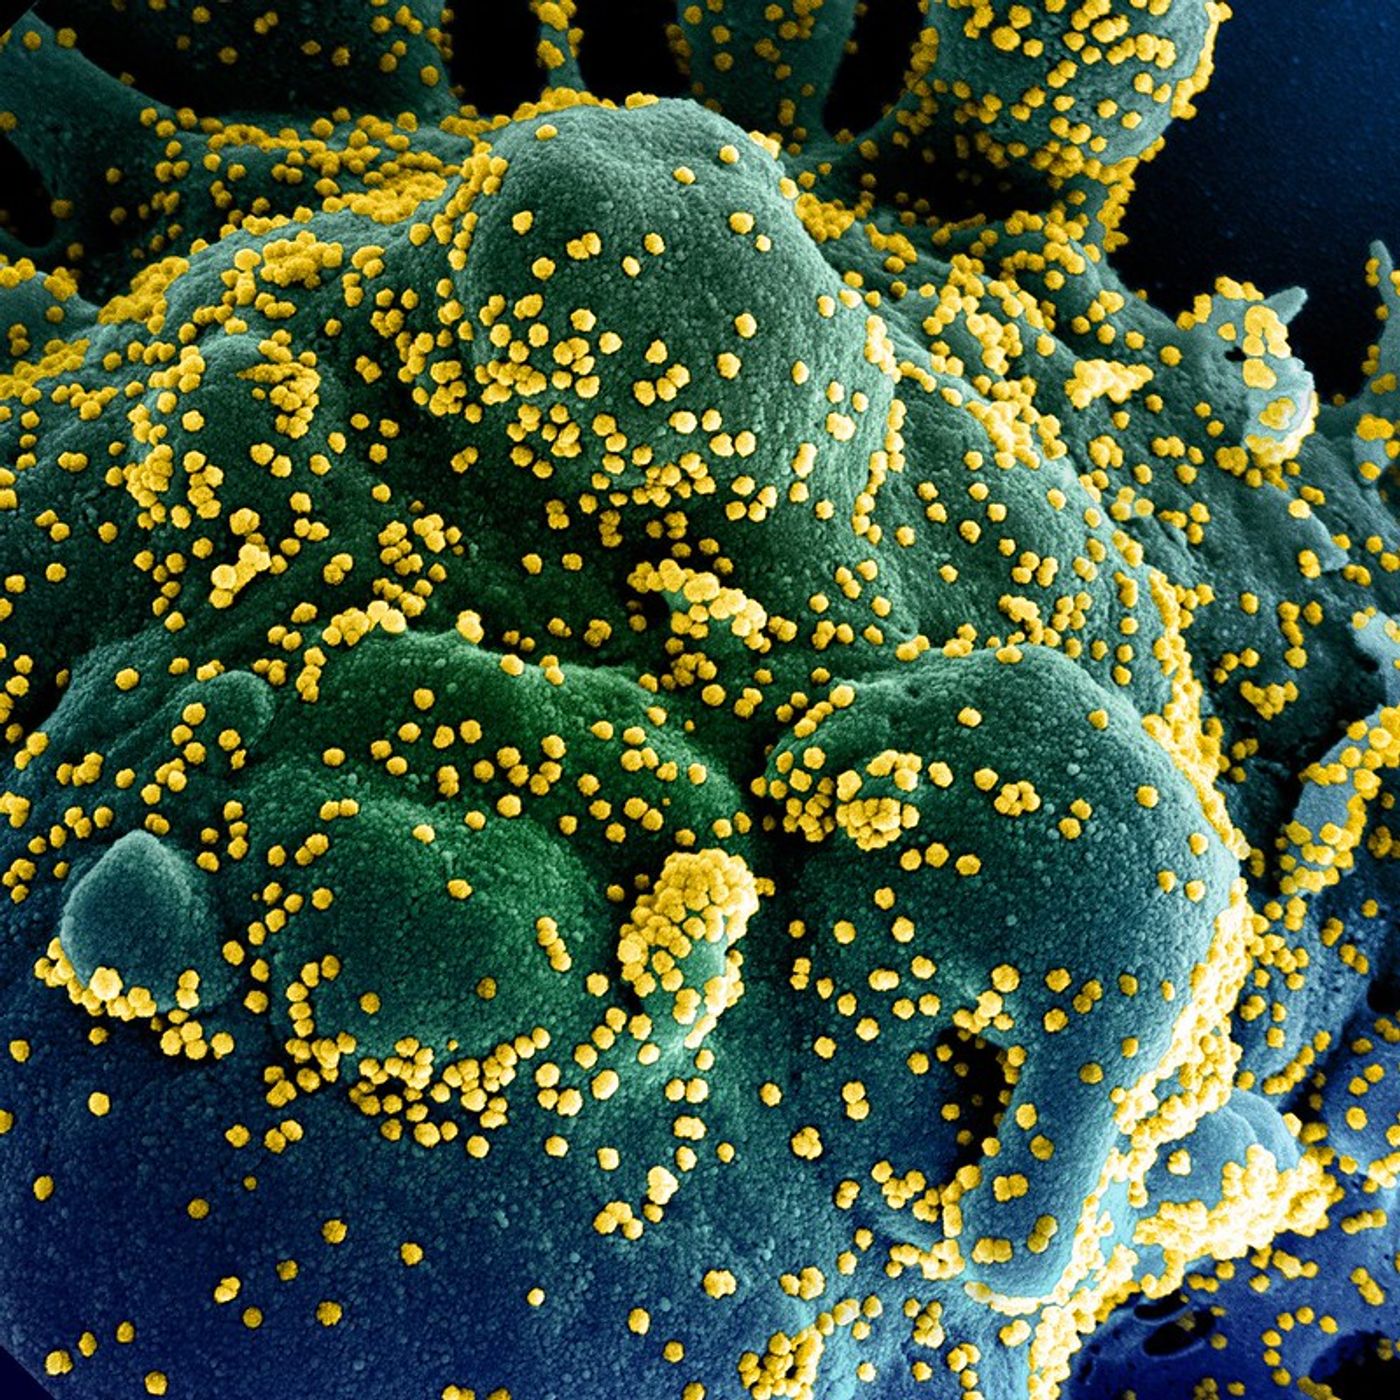 Colorized scanning electron micrograph of an apoptotic cell (blue/green) heavily infected with SARS-COV-2 virus particles (yellow), isolated from a patient sample. Image captured at the NIAID Integrated Research Facility (IRF) in Fort Detrick, Maryland. / Credit: NIAID